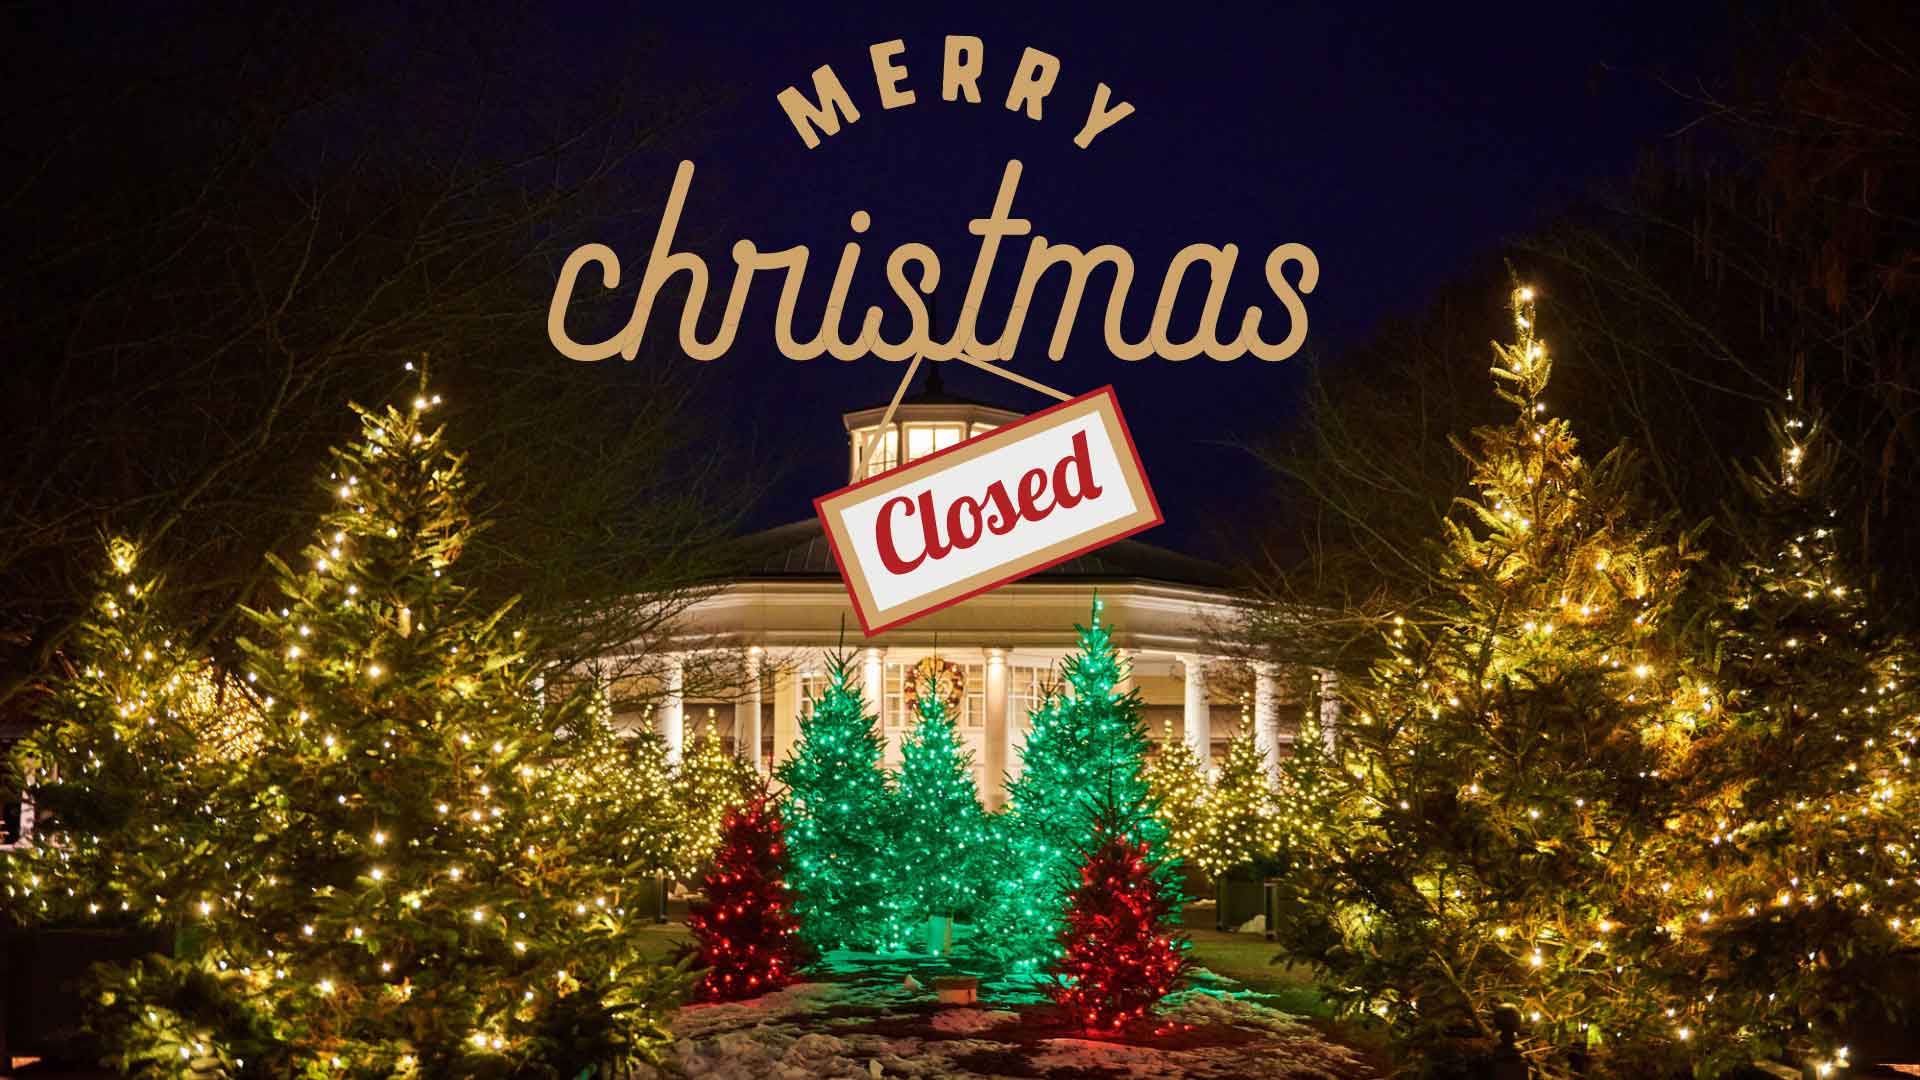 Merry Christmas Closed